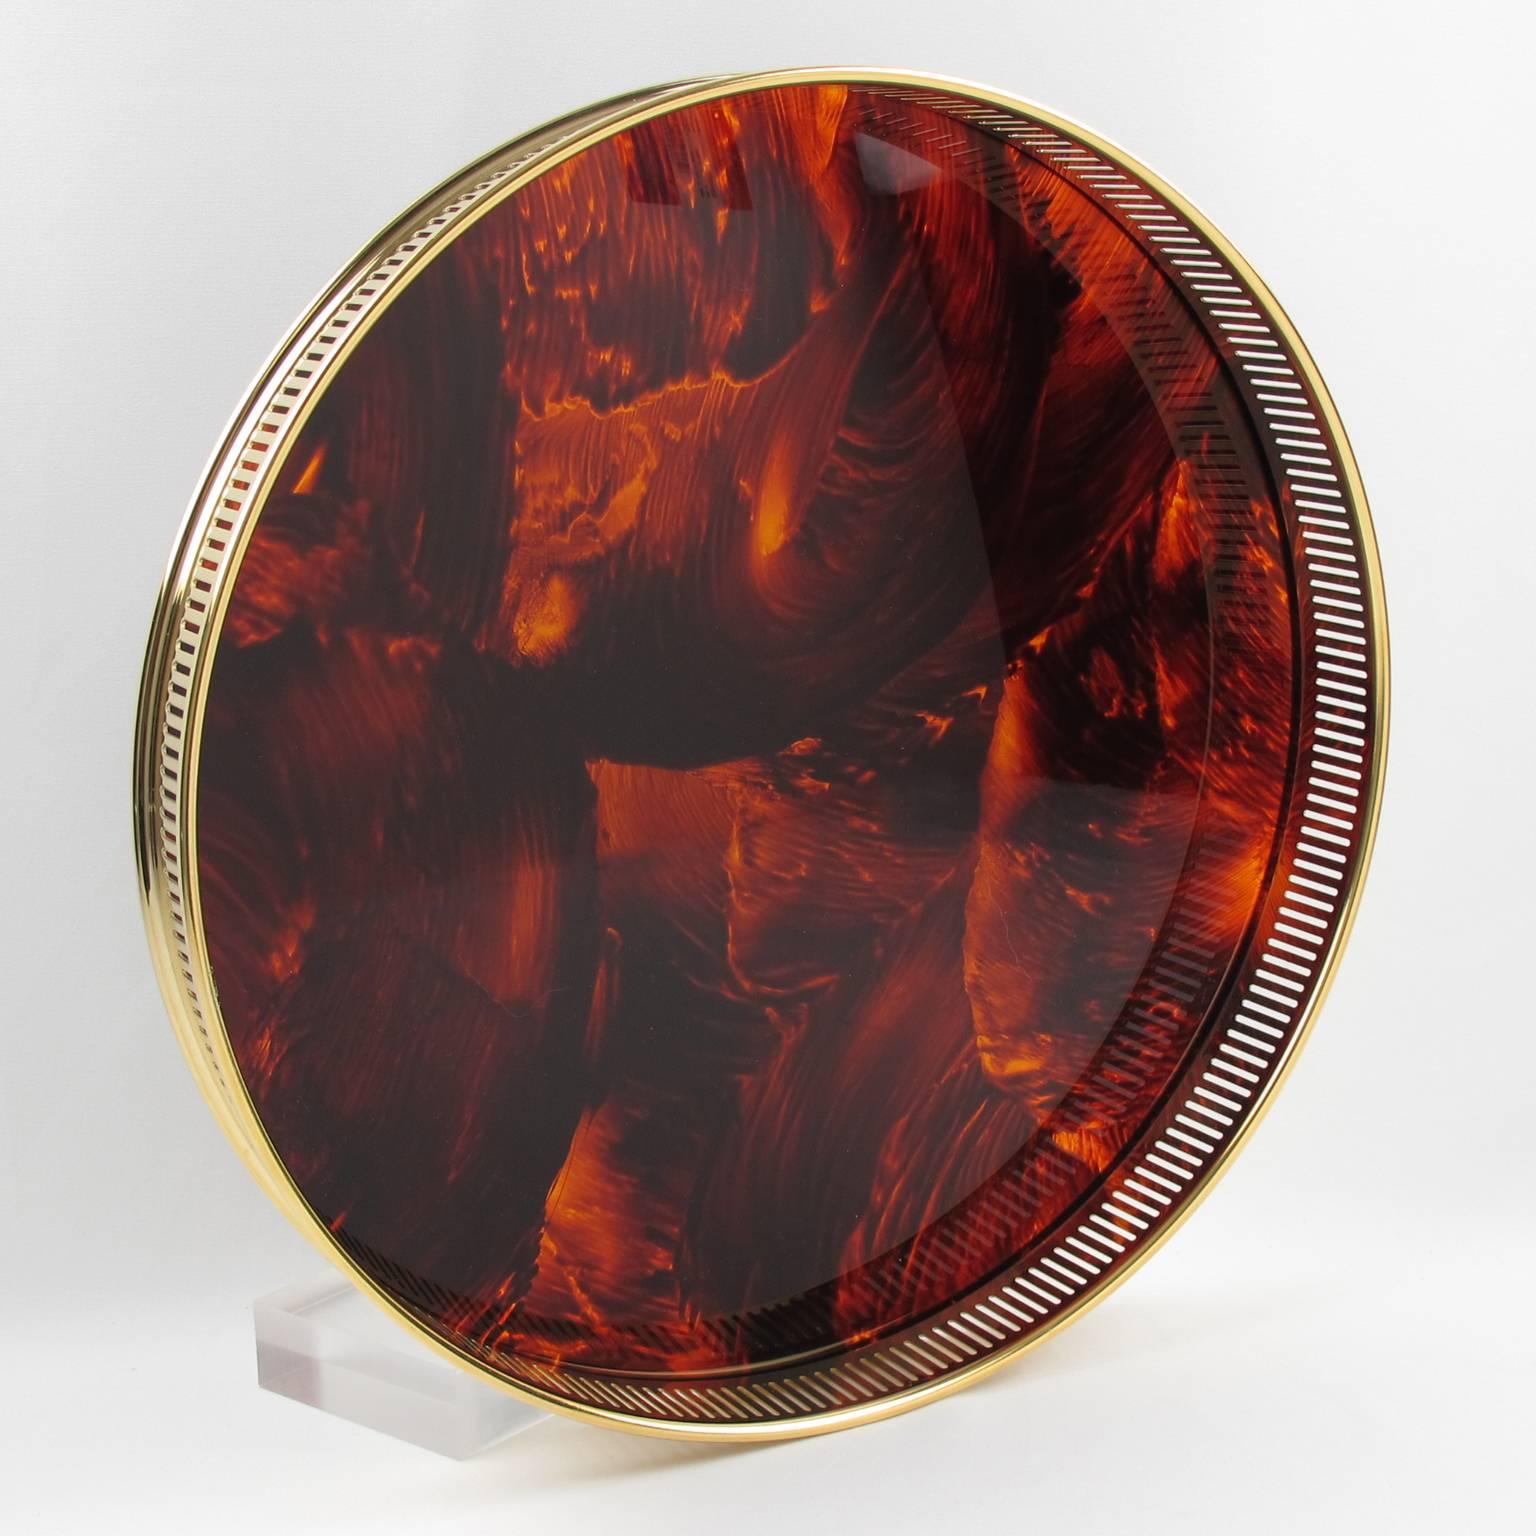 Elegant Mid-Century Modern barware serving tray by Italian designer Rede Guzzini. Large round shape with 24-karat gold-plate gallery and Lucite in tortoiseshell pattern color. Perfect for your next cocktail party. Mint condition and probably never